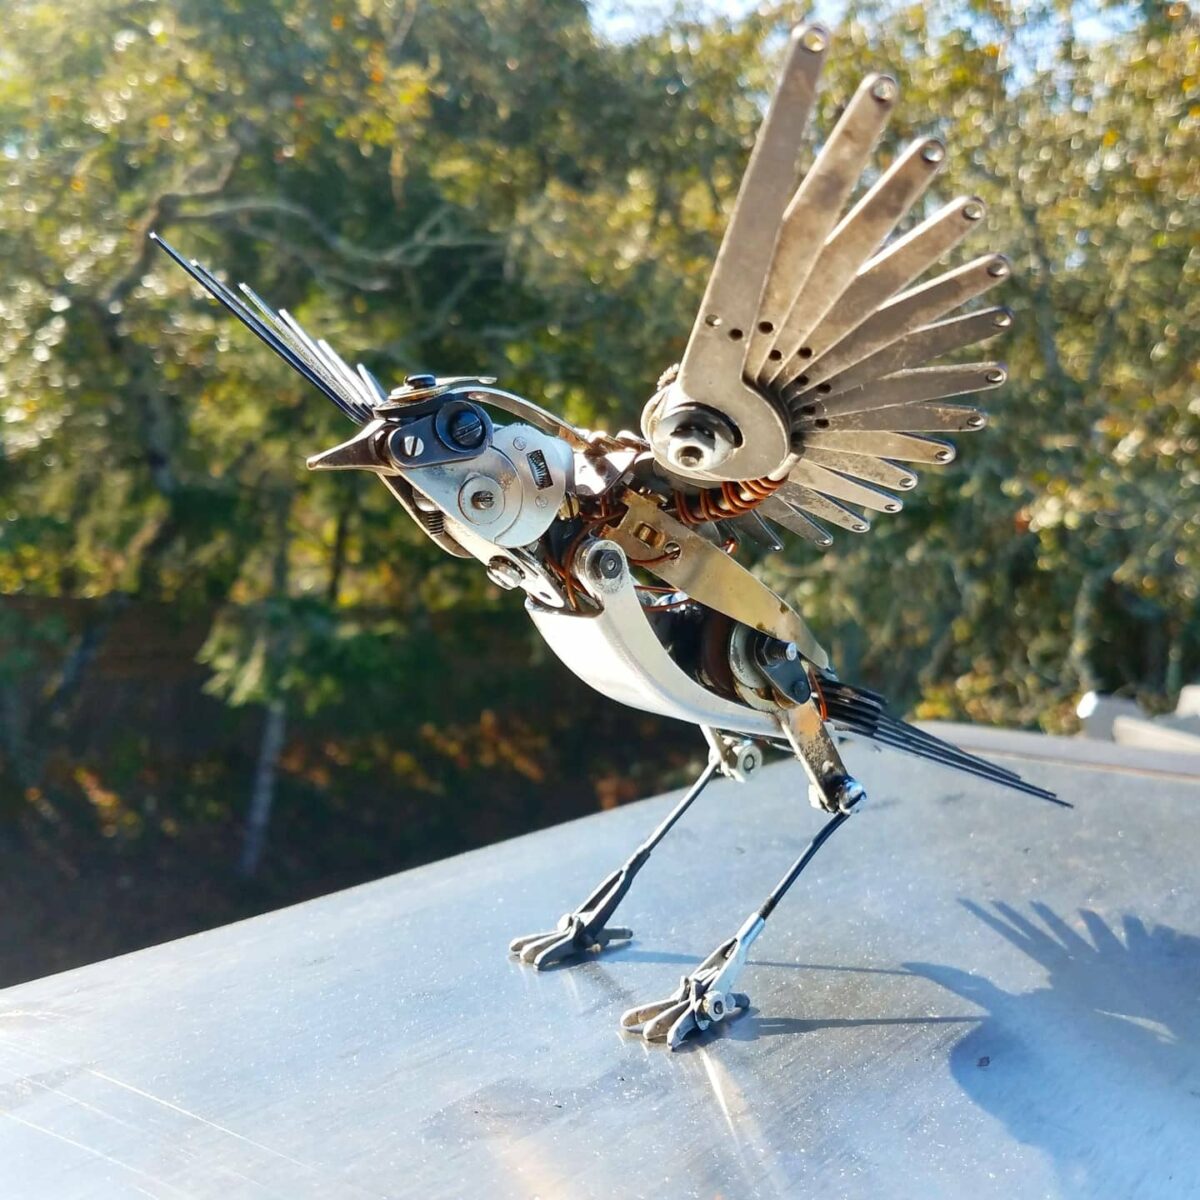 Incredible Animal Sculptures Made From Vintage Typewriters By Jeremy Mayer (2)